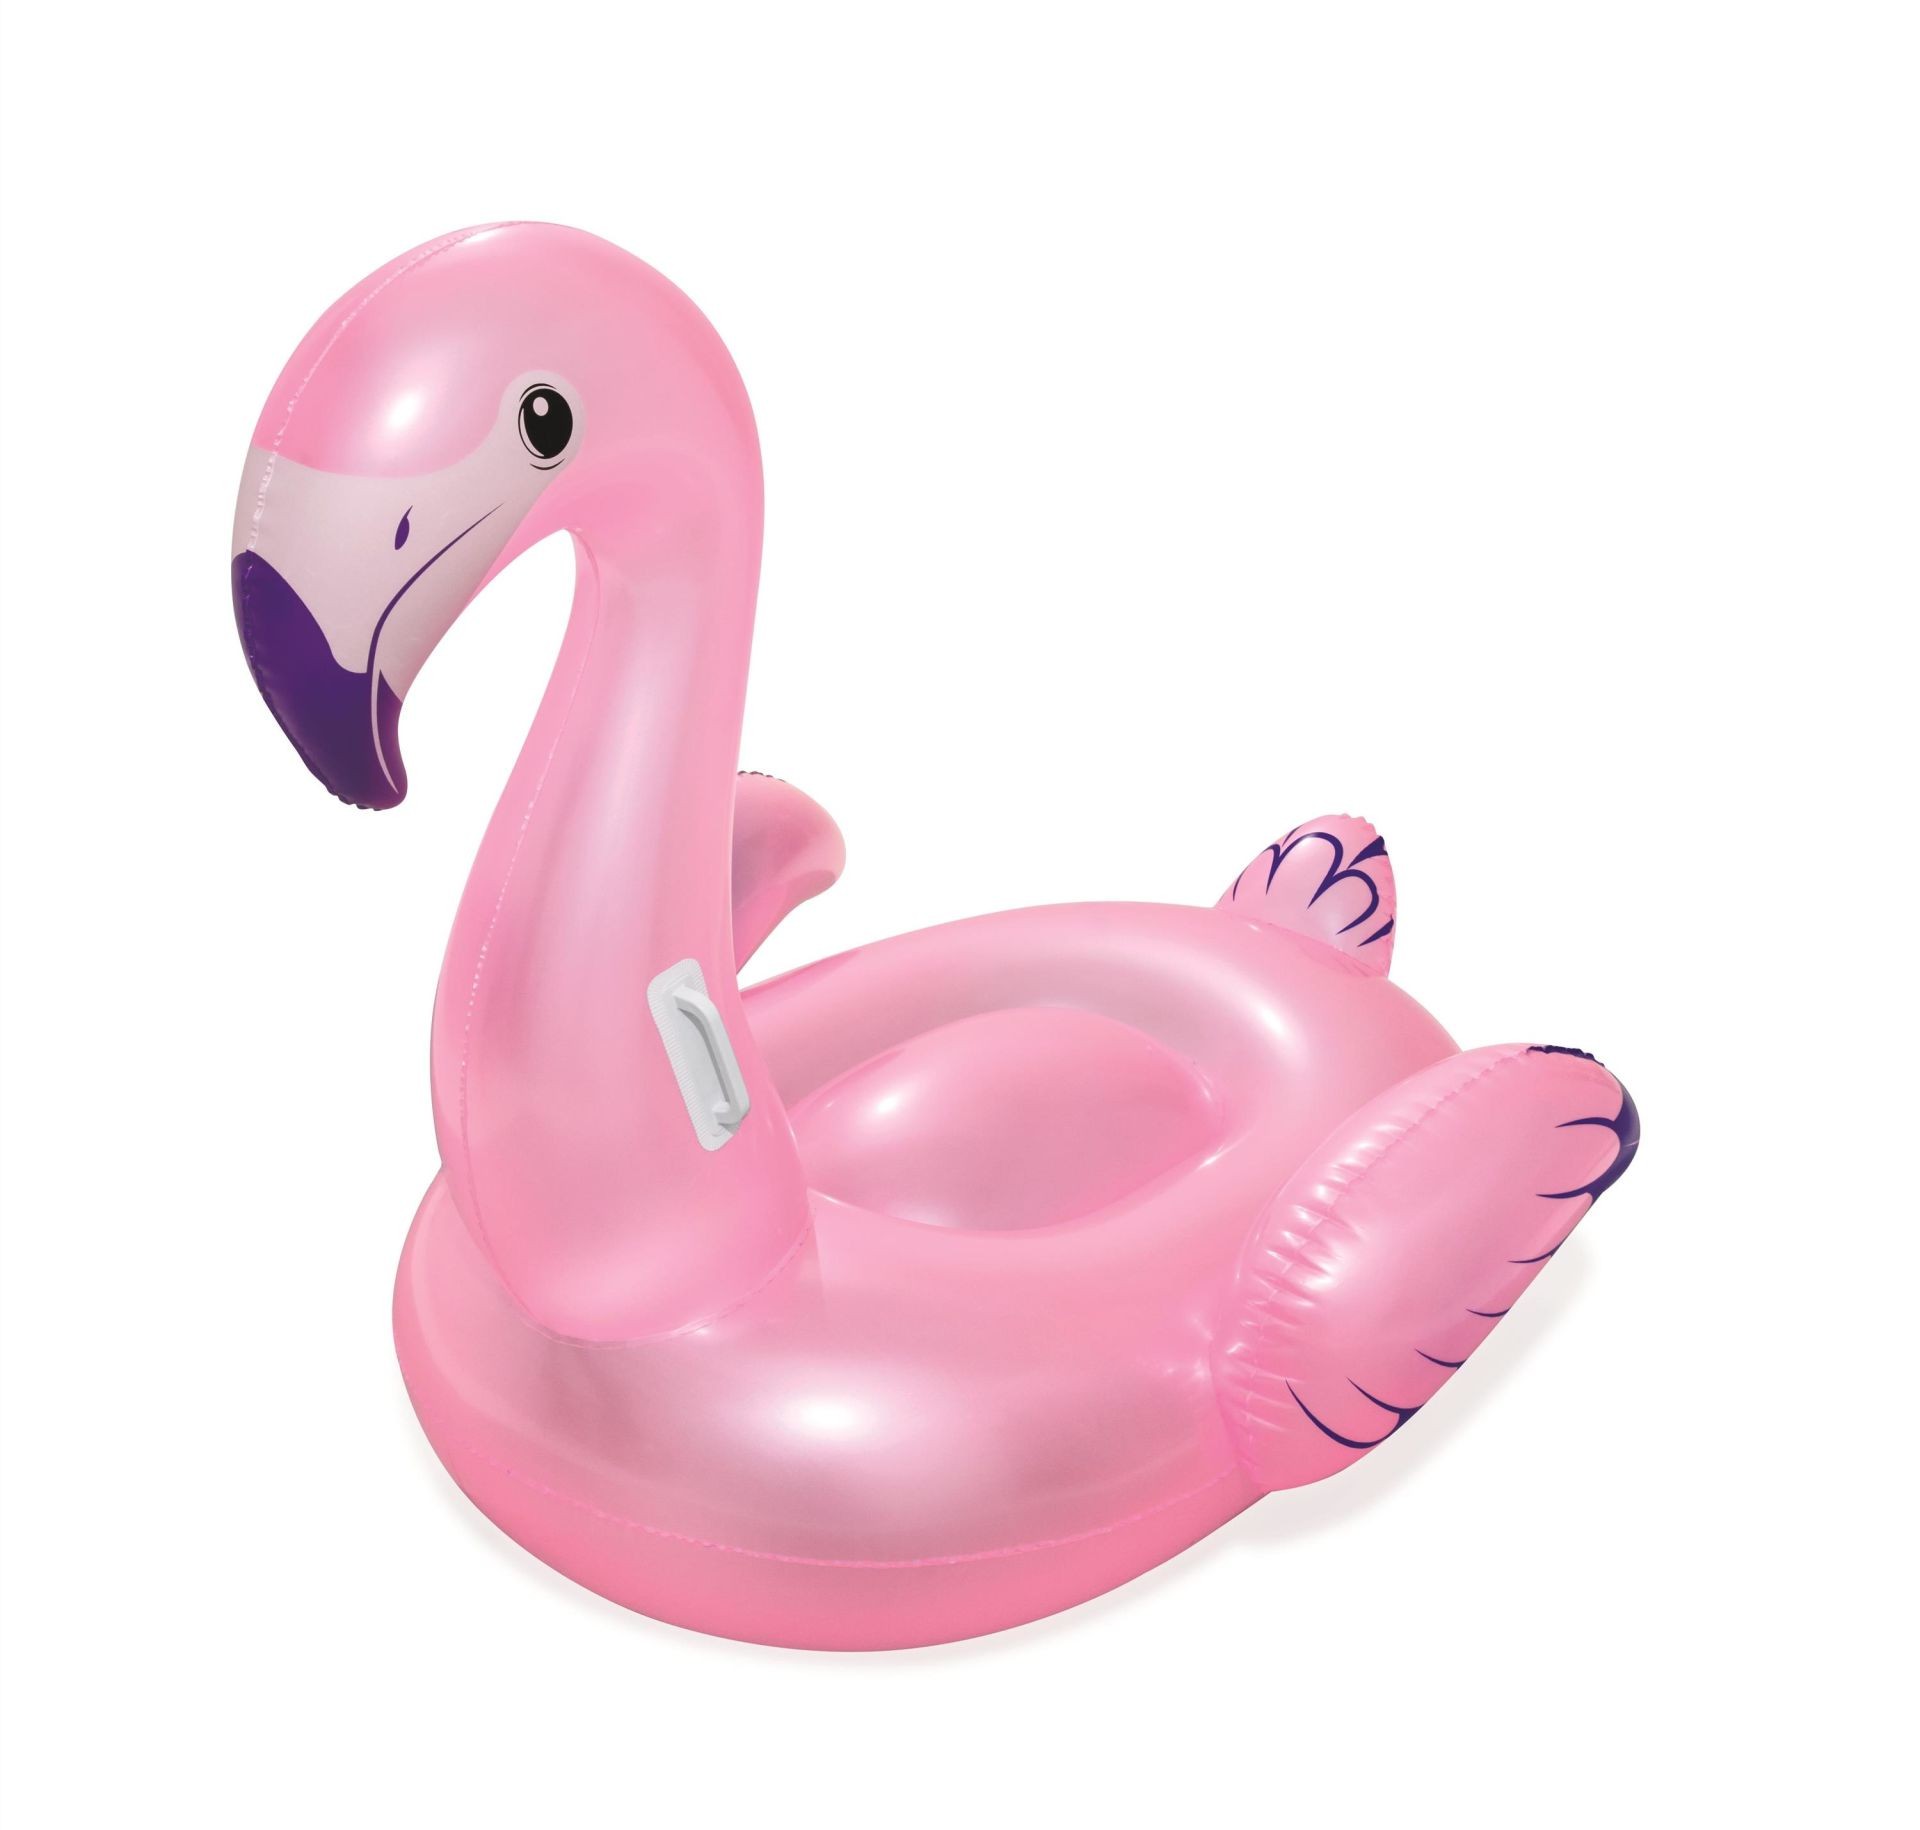 KZL-BW41122 RIDING FLAMINGO 127X127CM WITH HANDLE 8